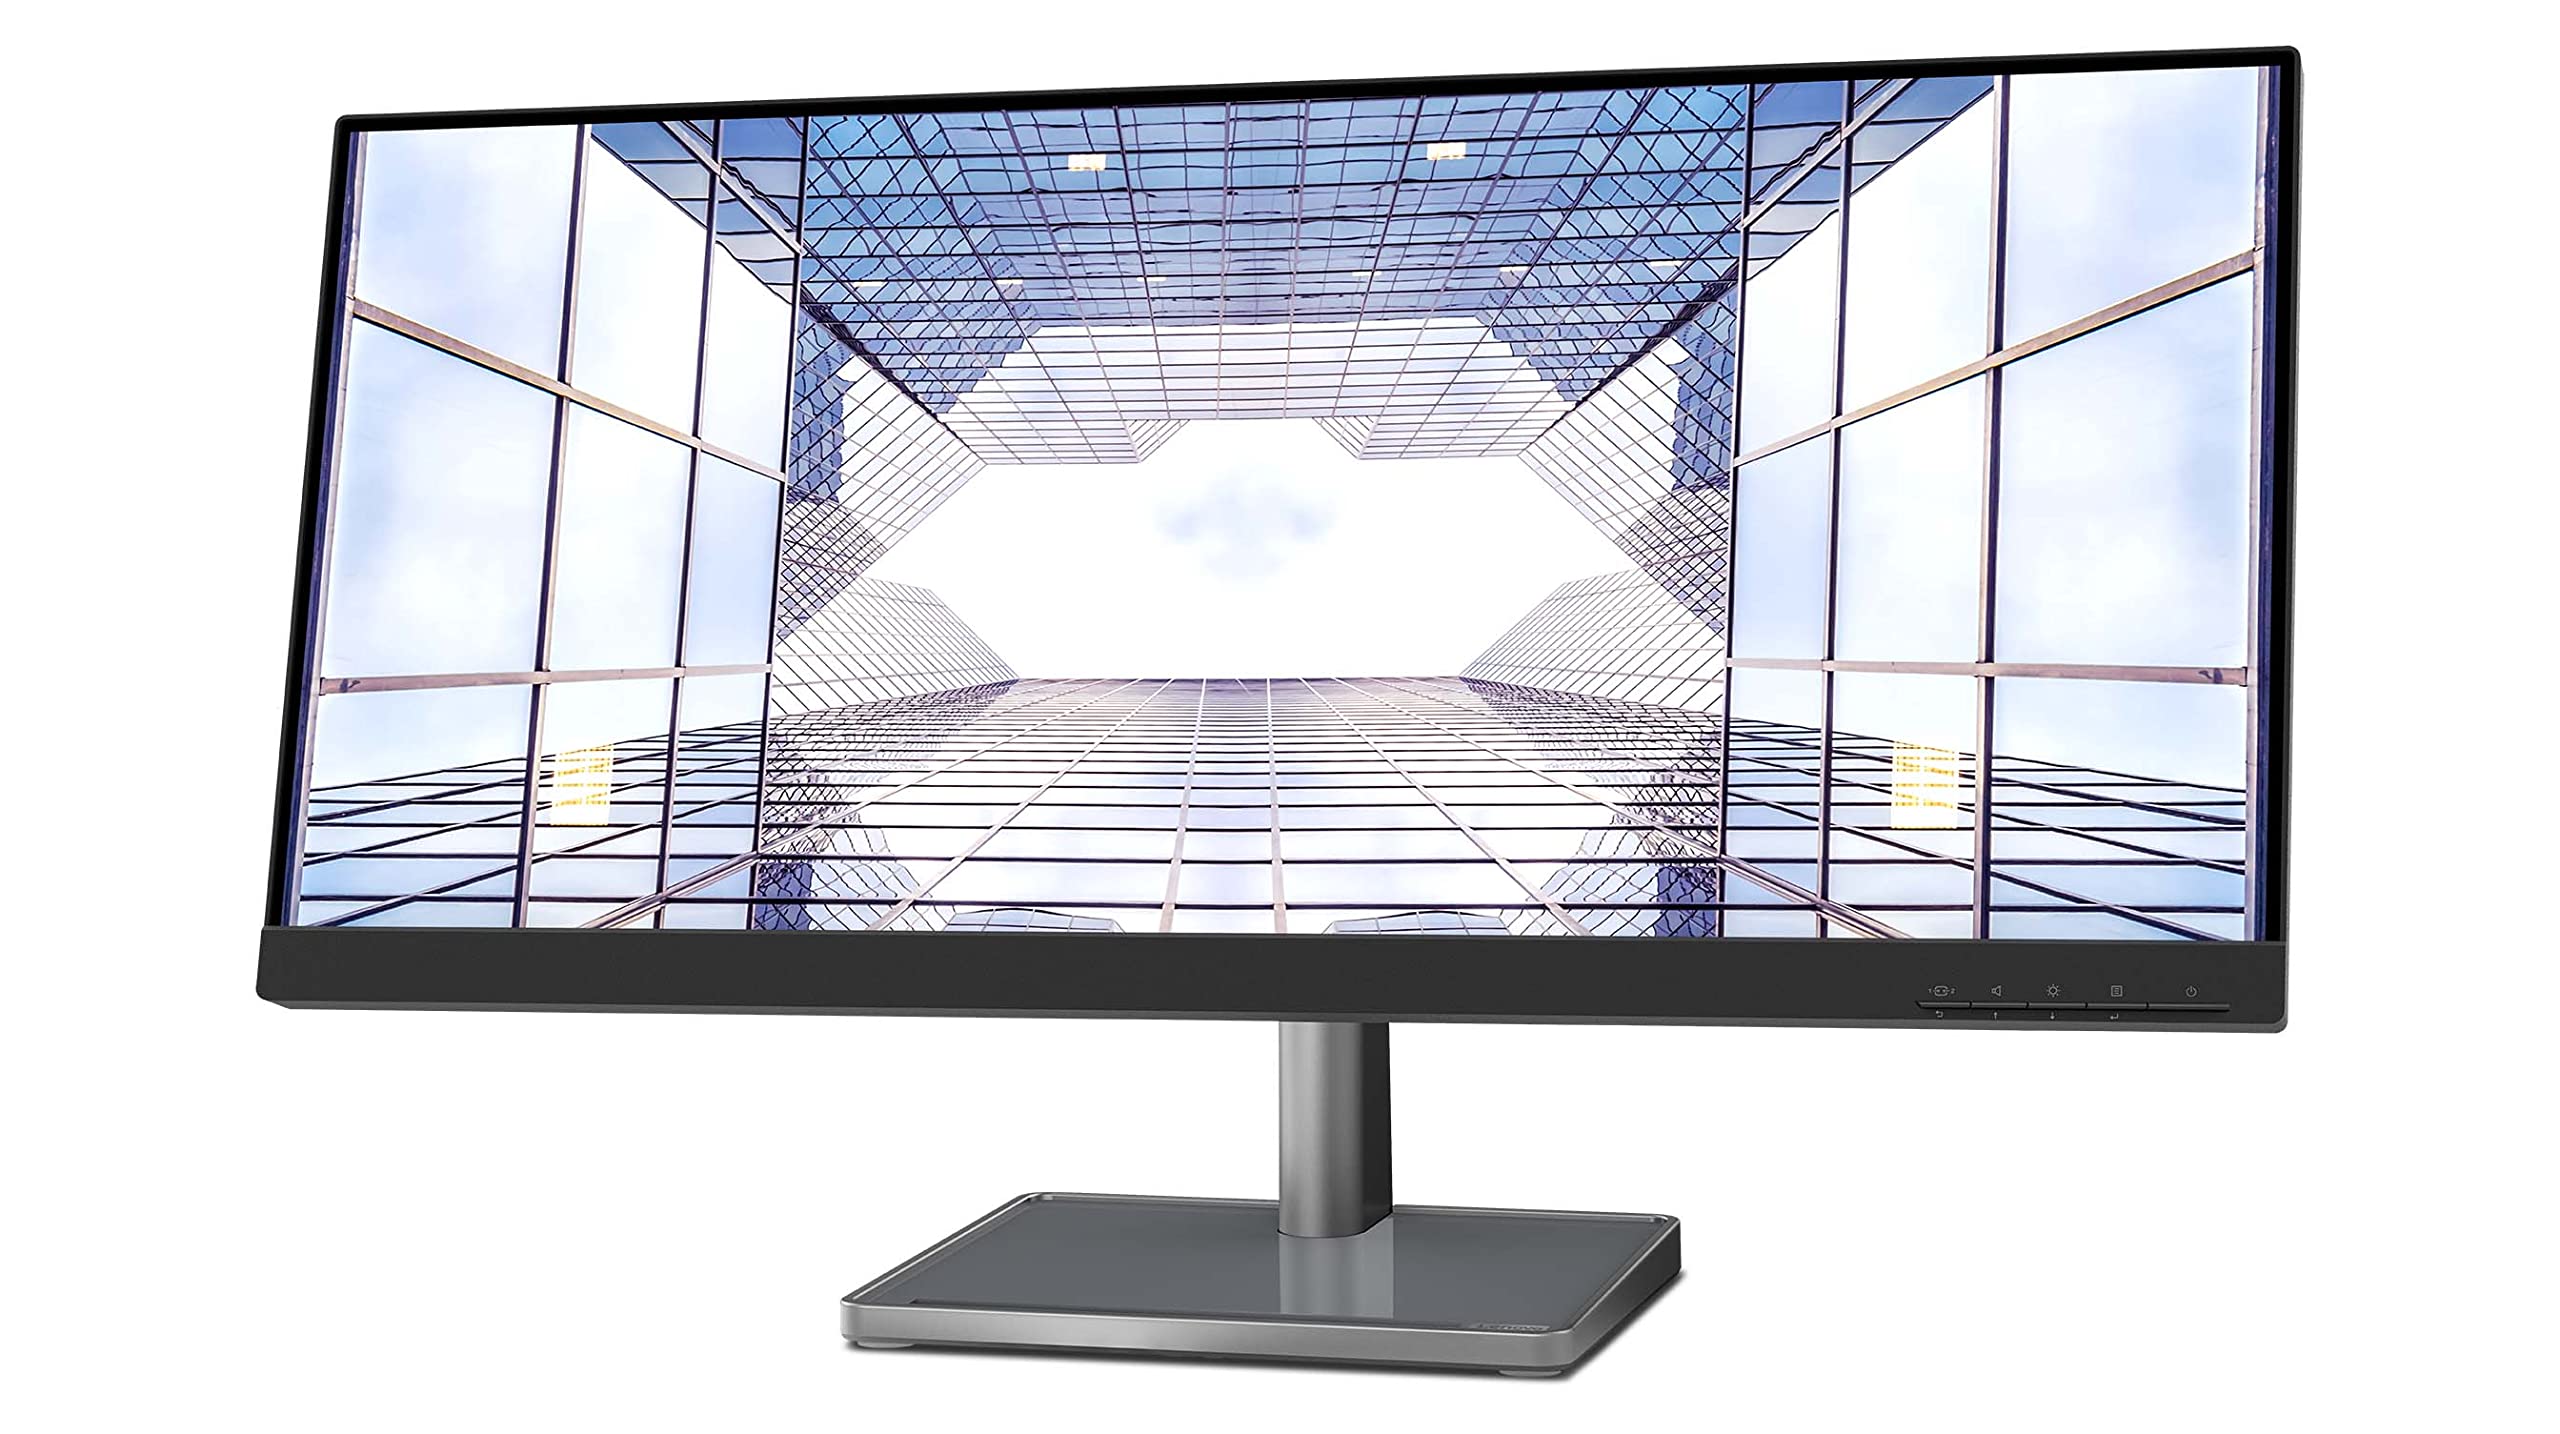 Lenovo L29w-30-2022 - Everyday Monitor - 29 Inch QHD - 90 Hz - AMD FreeSync - Low Blue Light Certified - Tilt Stand Integrated Speakers - HDMI & DP